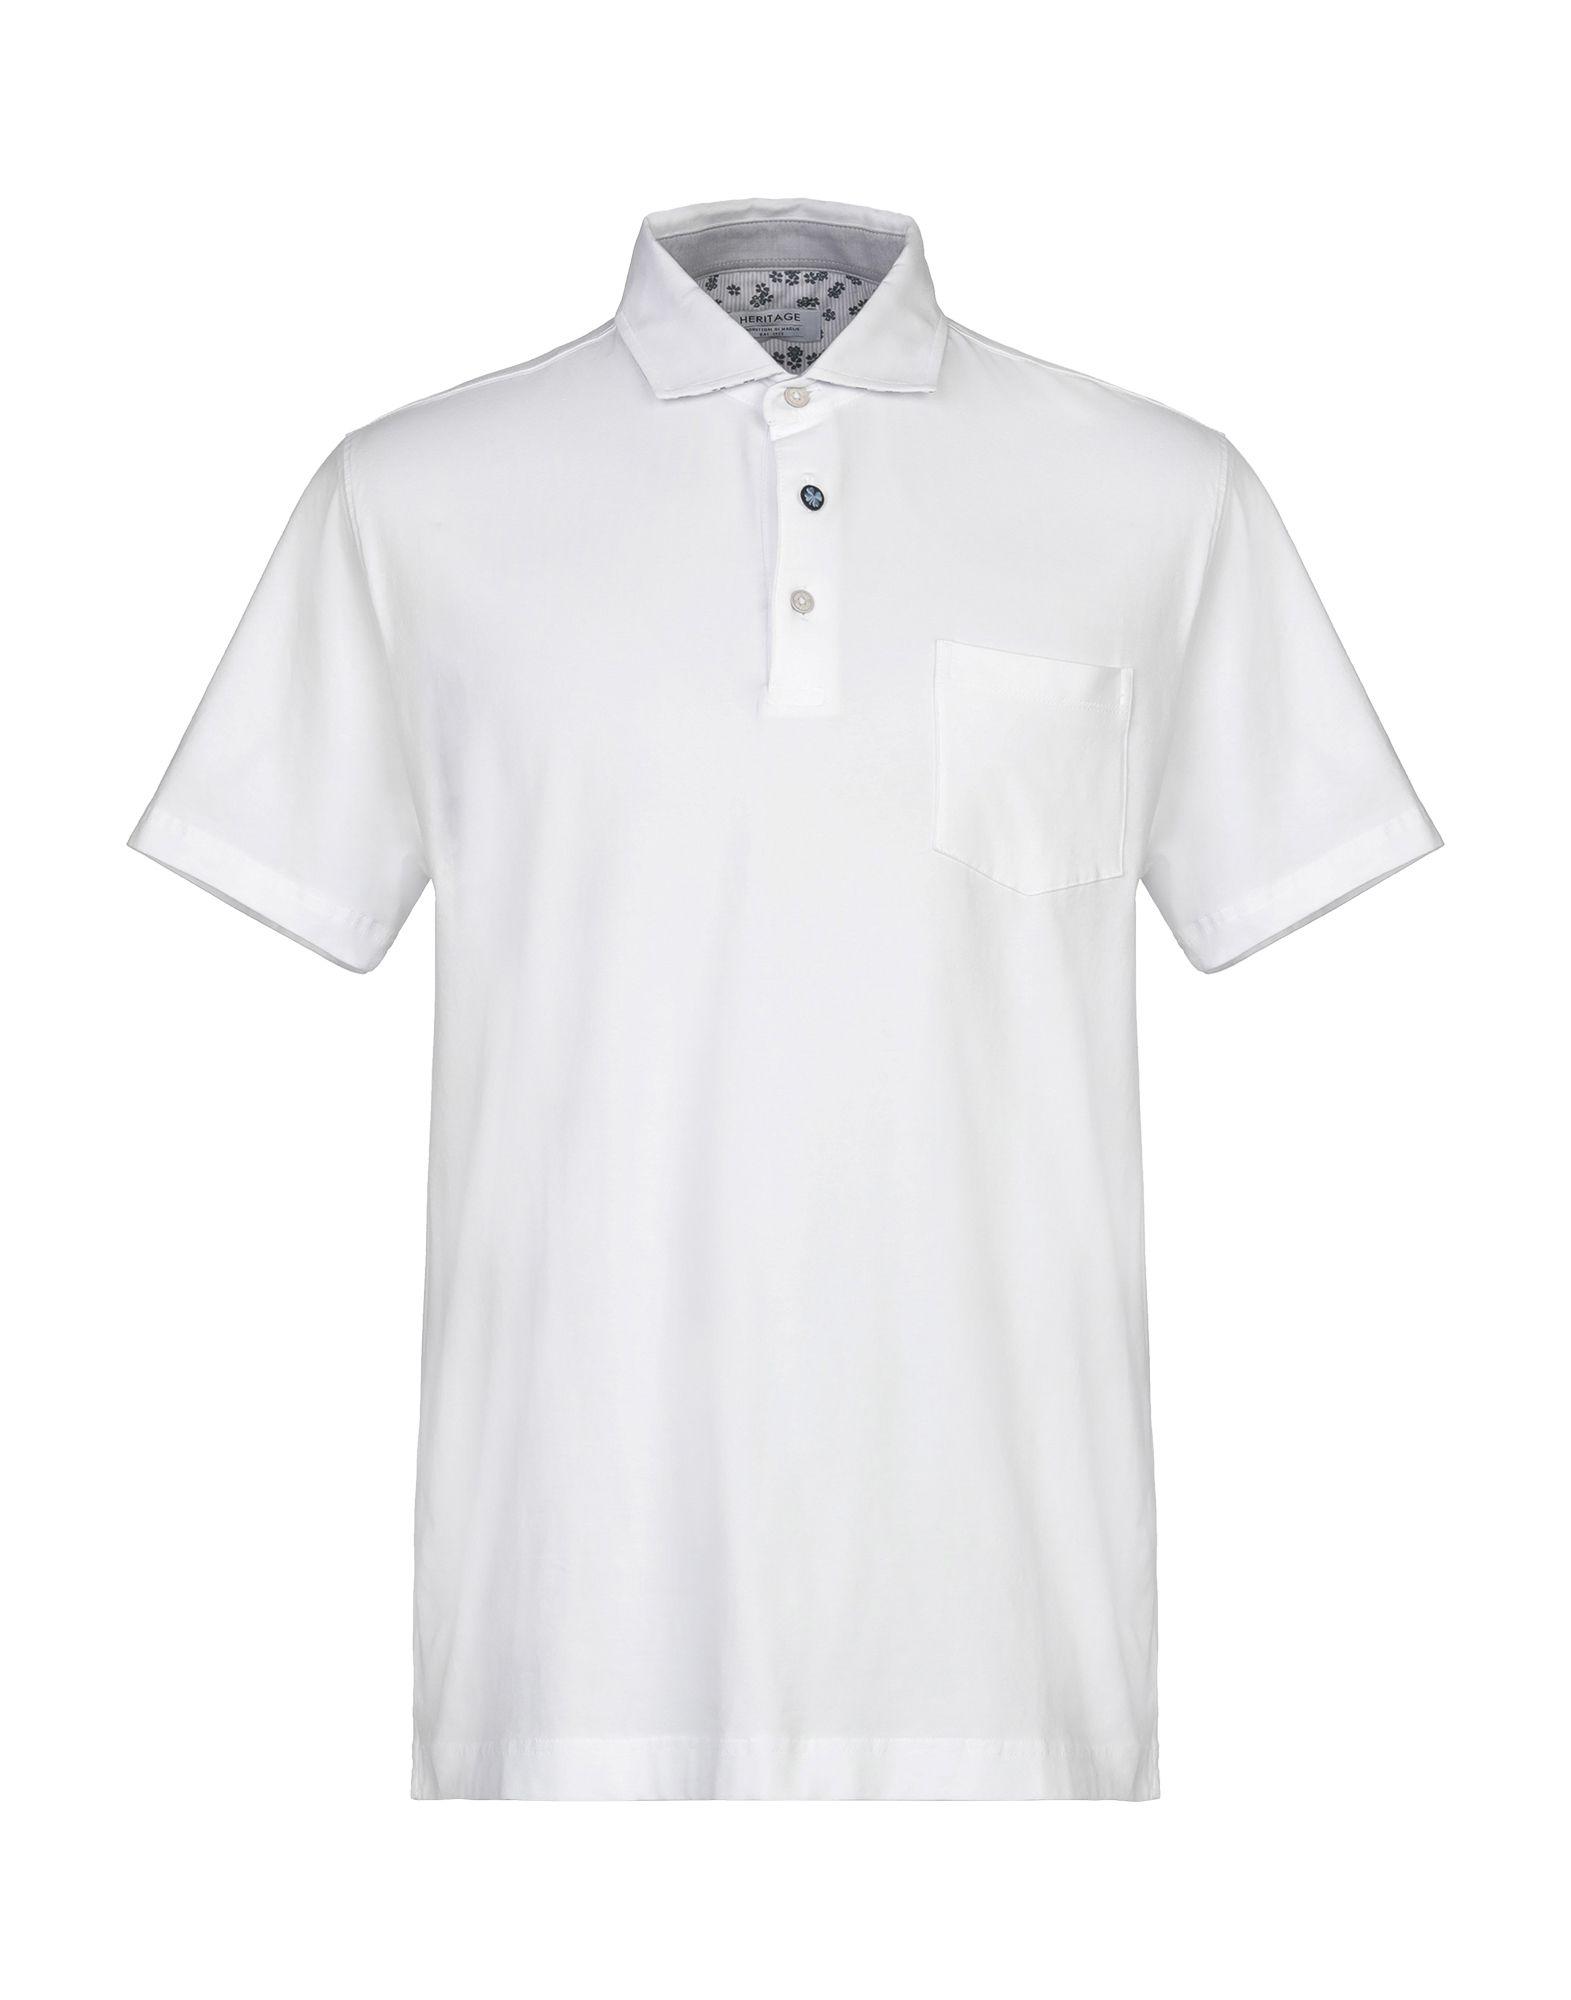 Heritage Polo Shirt in White for Men - Lyst